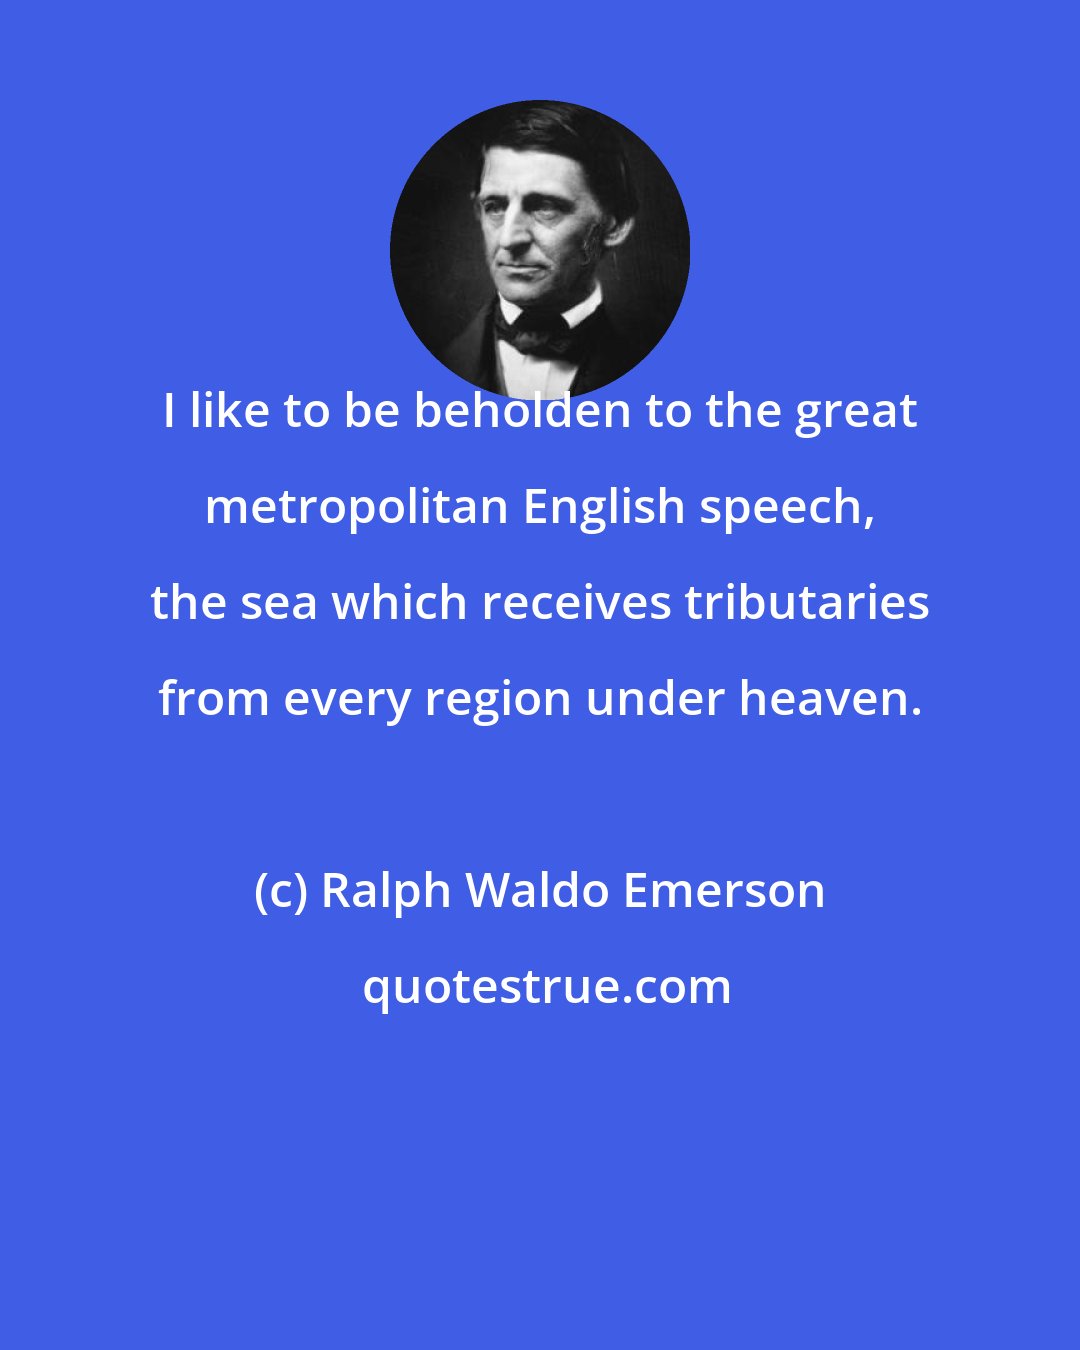 Ralph Waldo Emerson: I like to be beholden to the great metropolitan English speech, the sea which receives tributaries from every region under heaven.